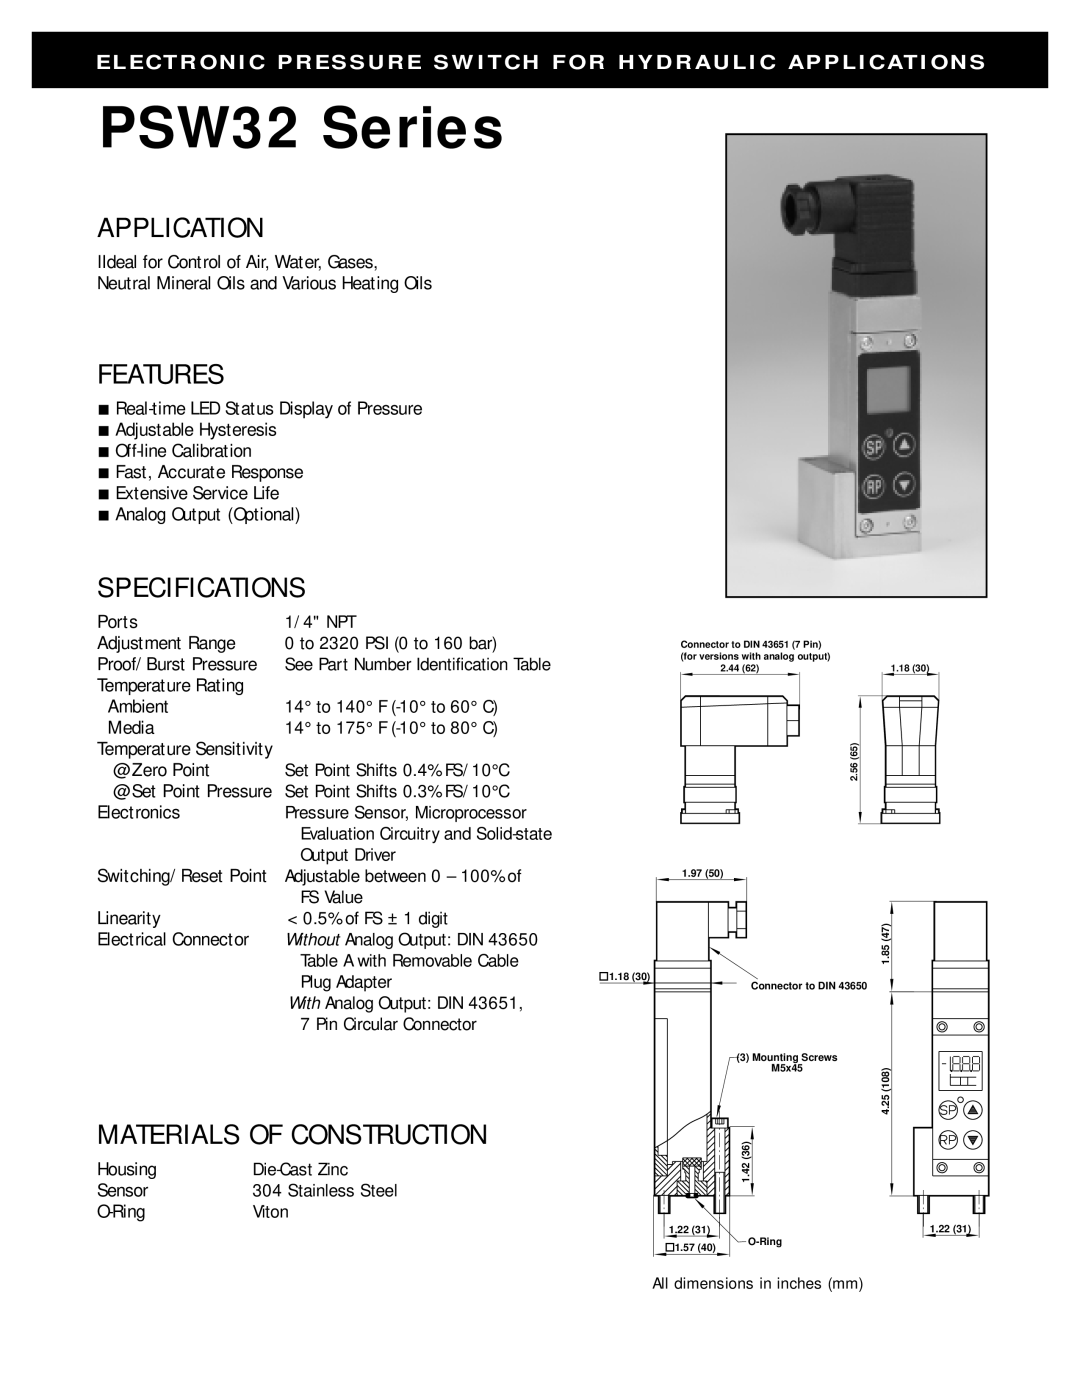 Omega Speaker Systems PSW32 manual Application, Features, Specifications, Materials of Construction 